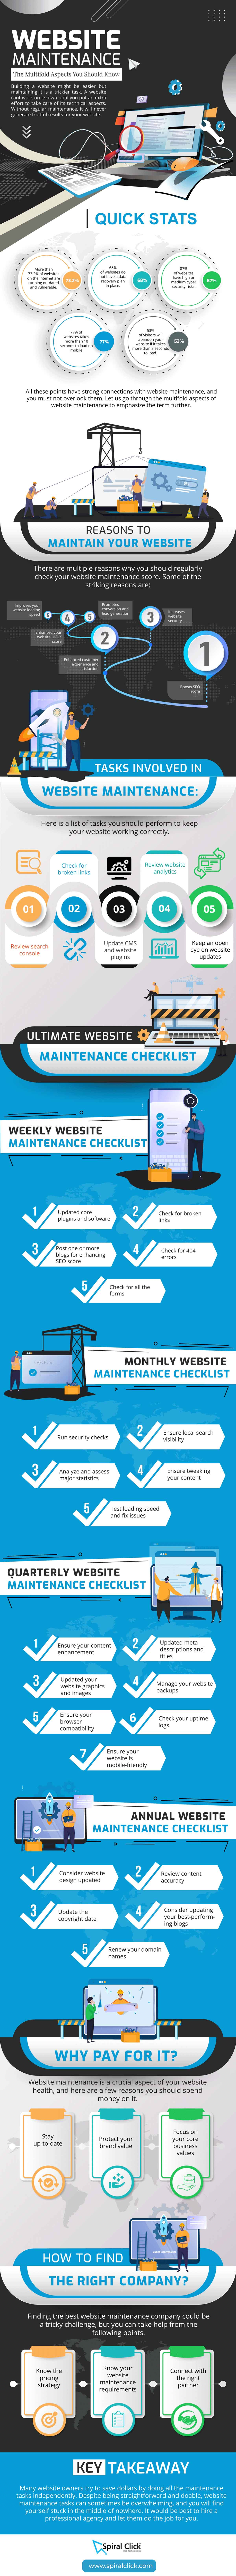 Website Maintenance: The Multifold Aspects You Should Know